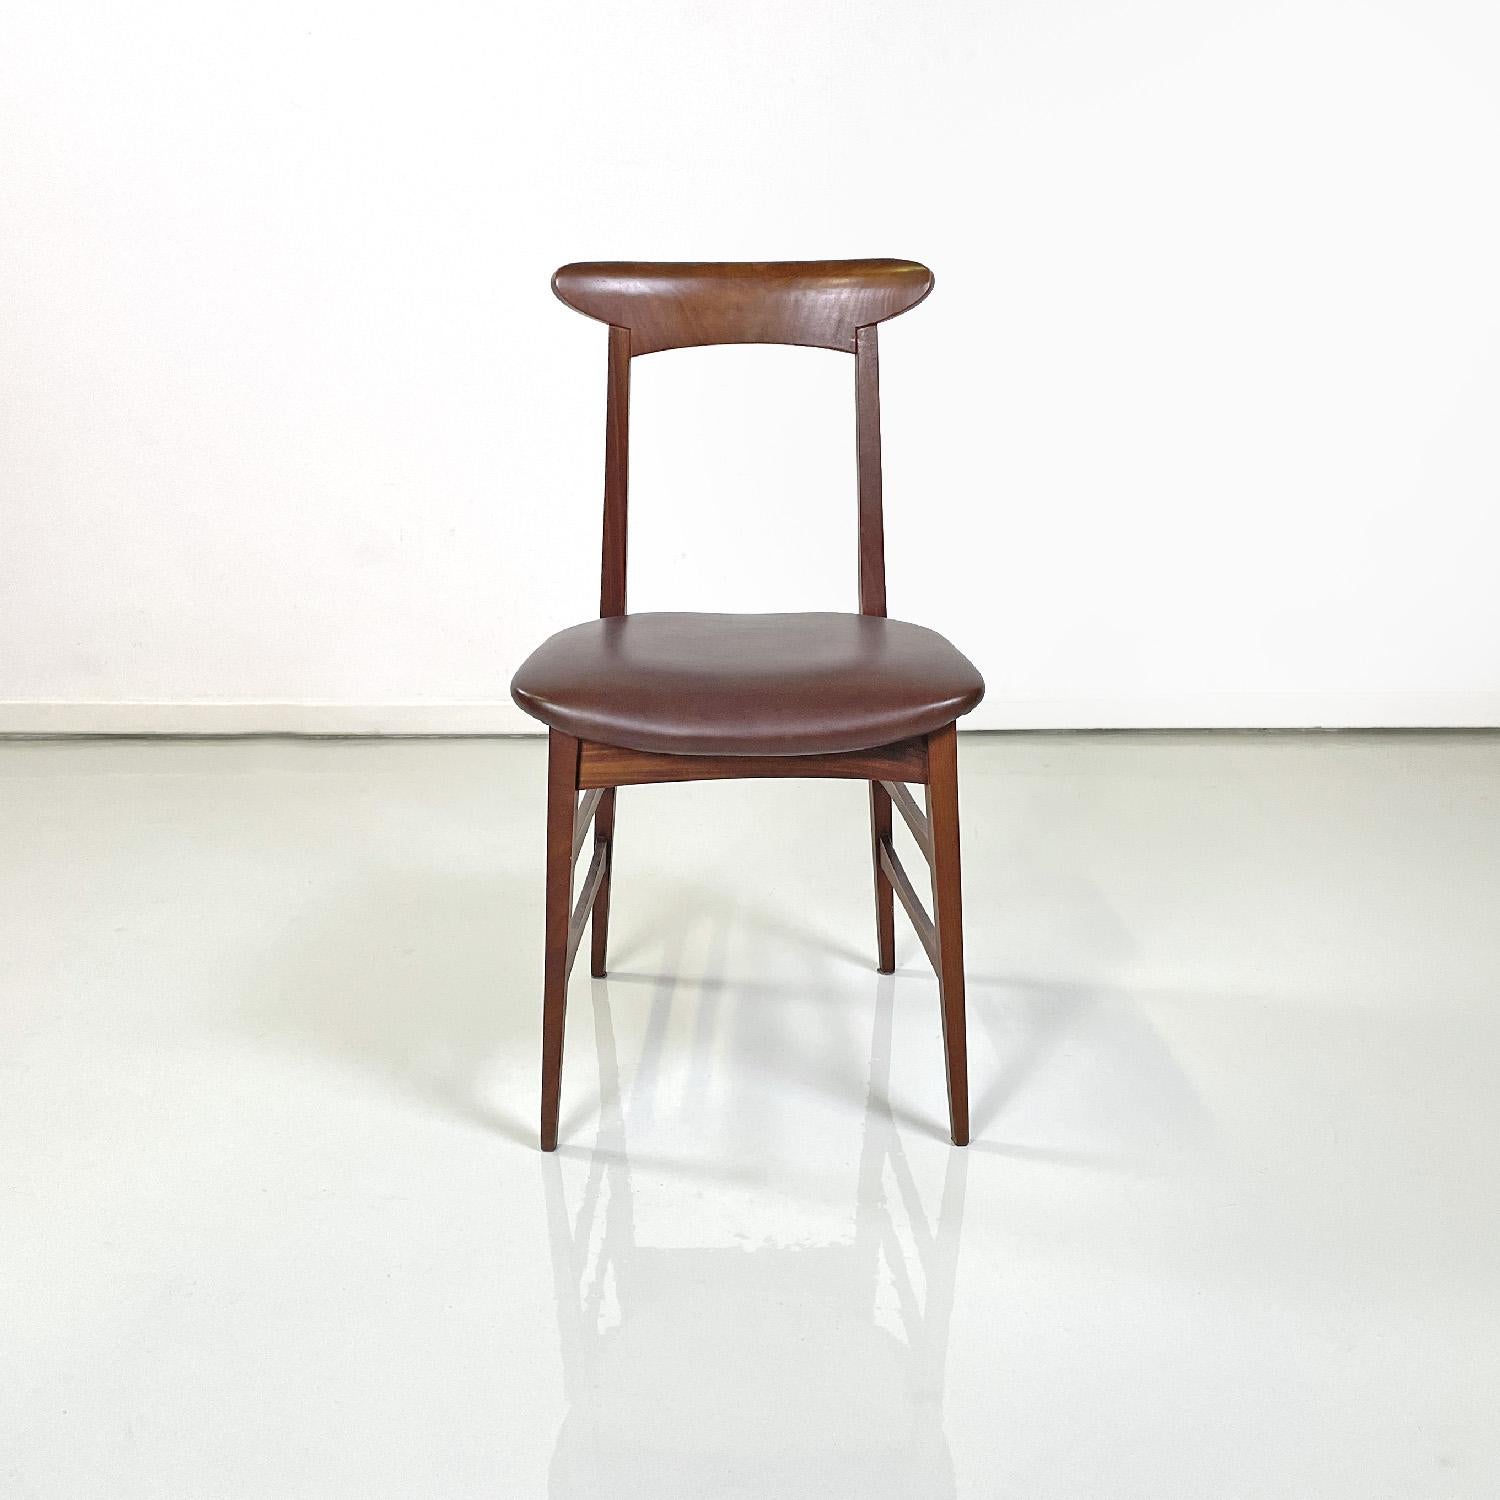 Mid-Century Modern Danish mid-century modern wooden and brown leather chairs, 1950s For Sale